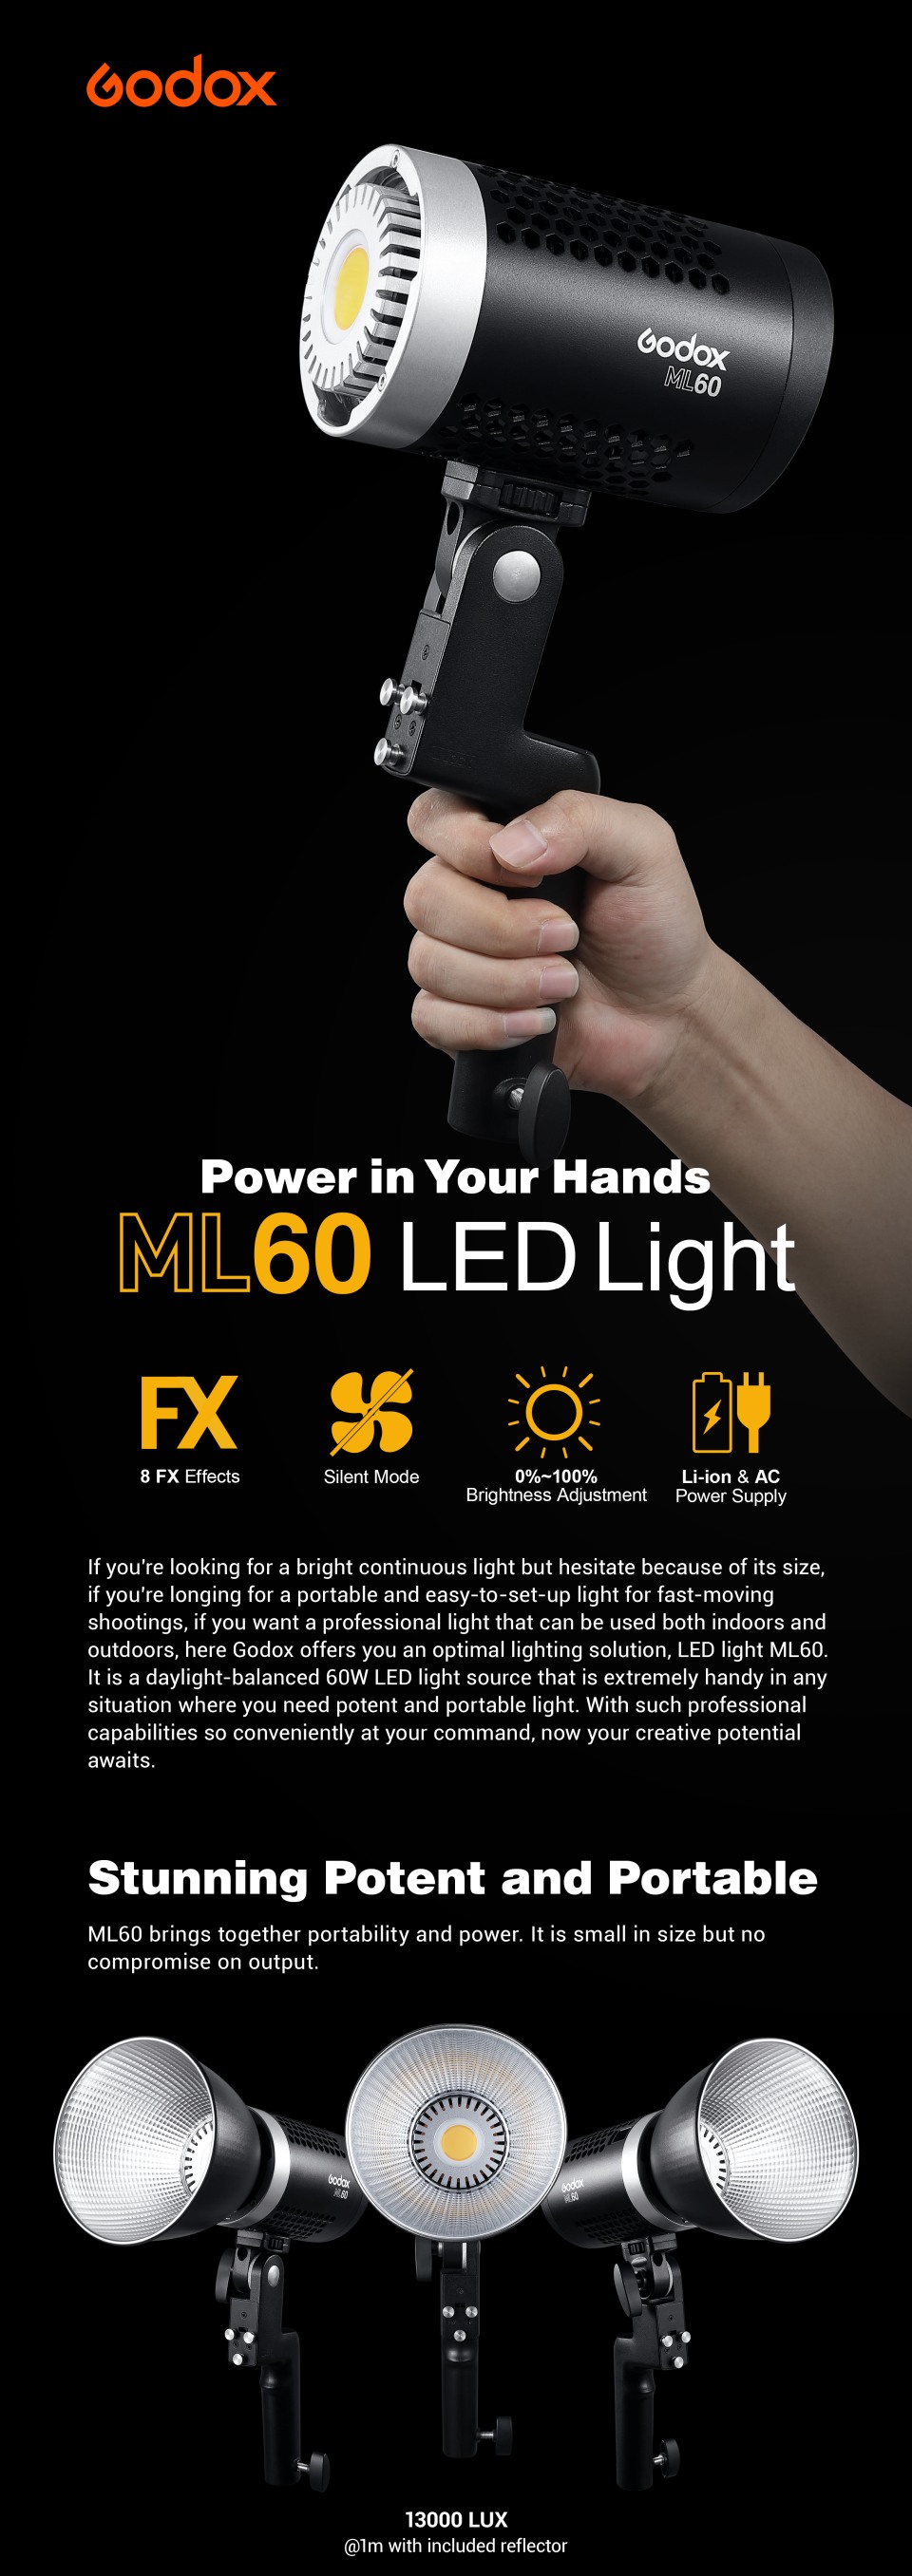 Lamp in a hand, title Godox ML60 LED Light. Power in your Hands. Stunning Potent and Portable.